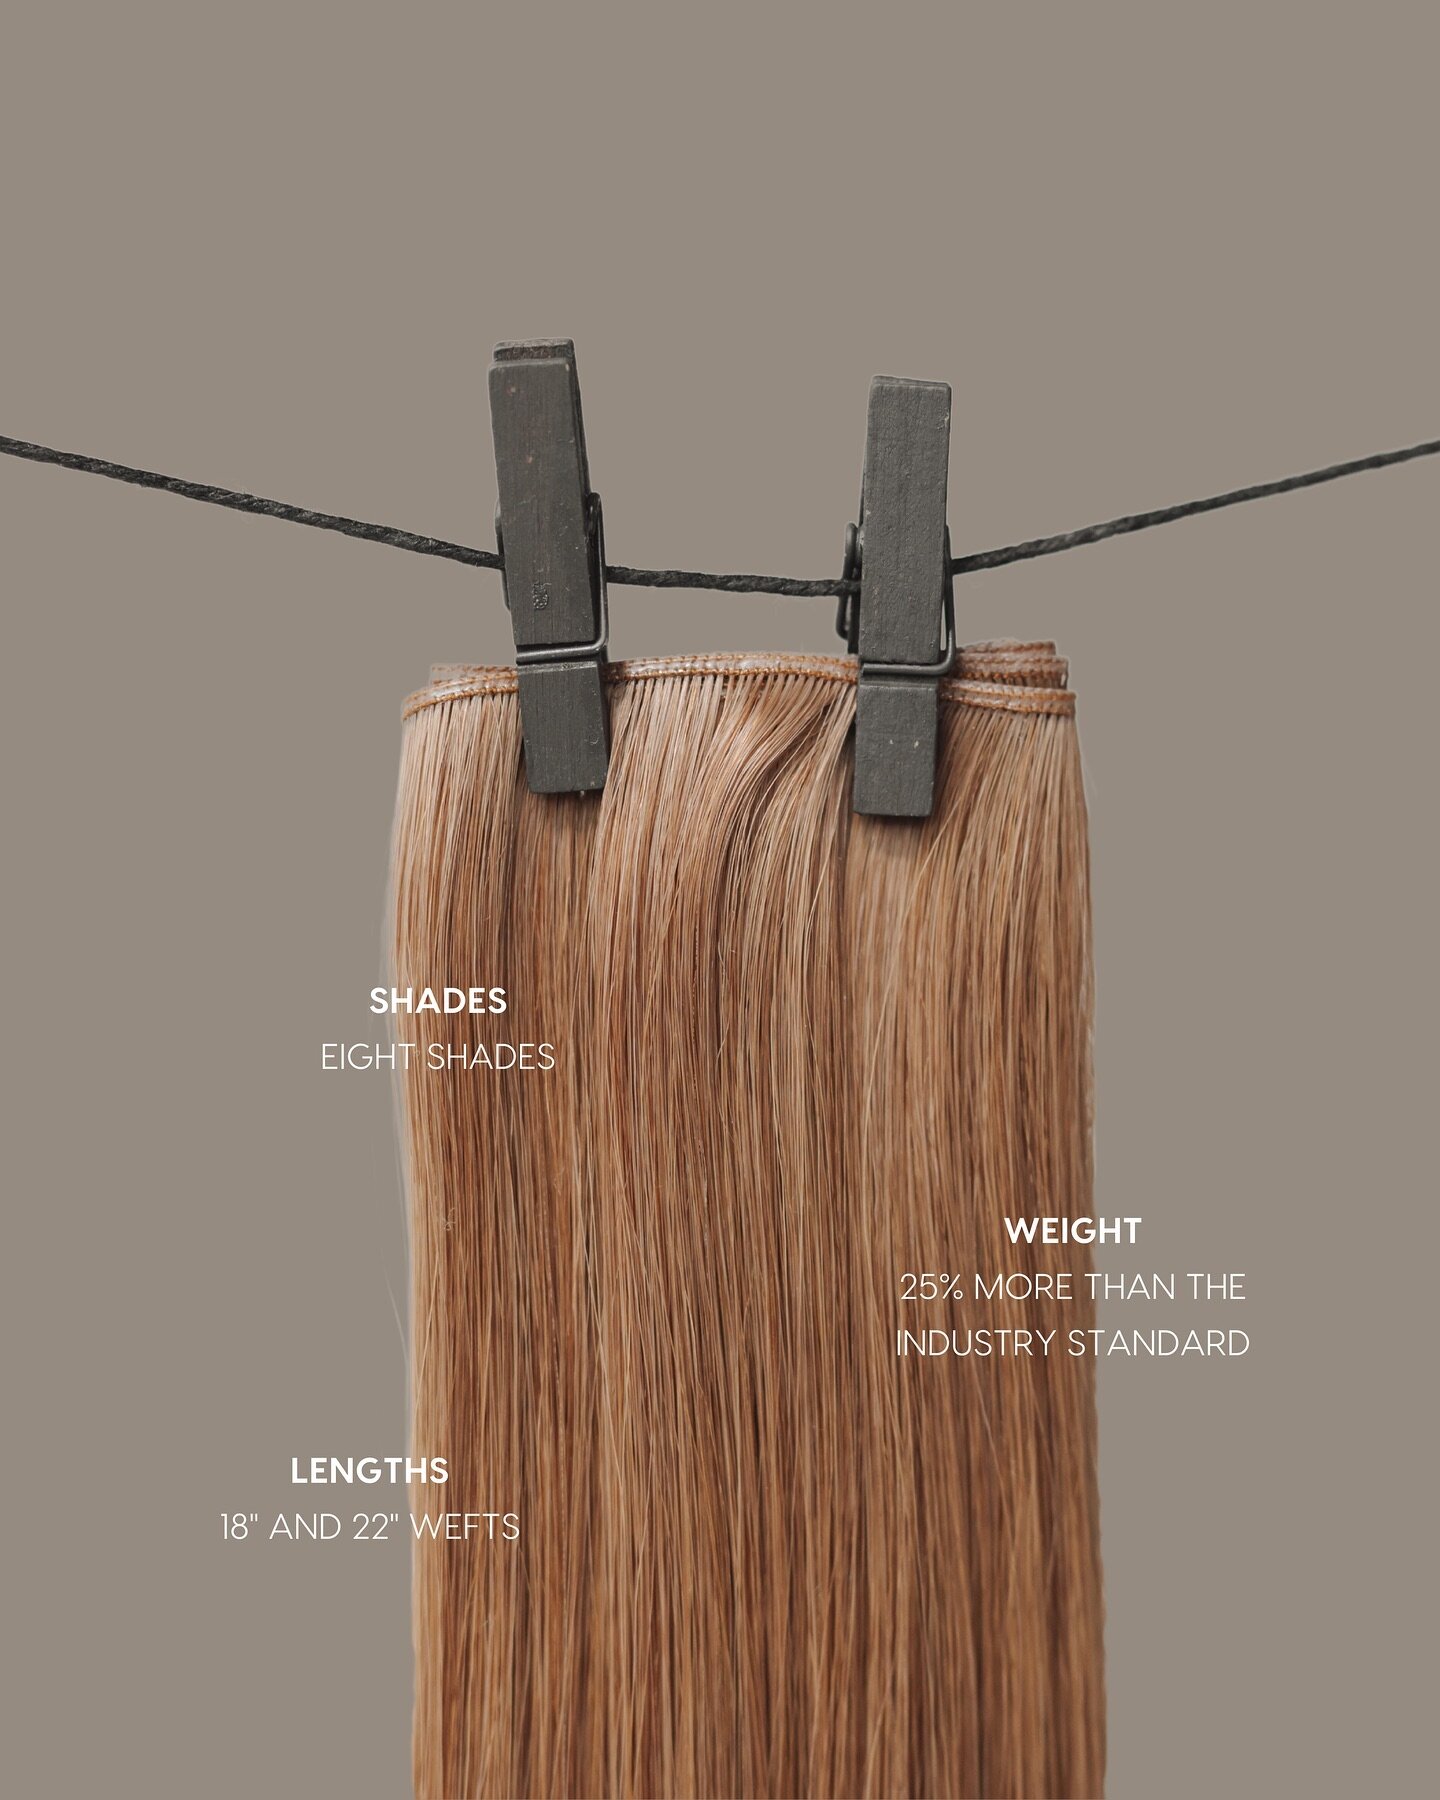 Specs of Canvas Hair. 

We&rsquo;ve created eight stunning shades that come in 18&rdquo; and 22&rdquo; inch options. 

Our wefts weigh 25% more than the industry standard. 

Our hair is in stock at @casameka or you have the option to order online via